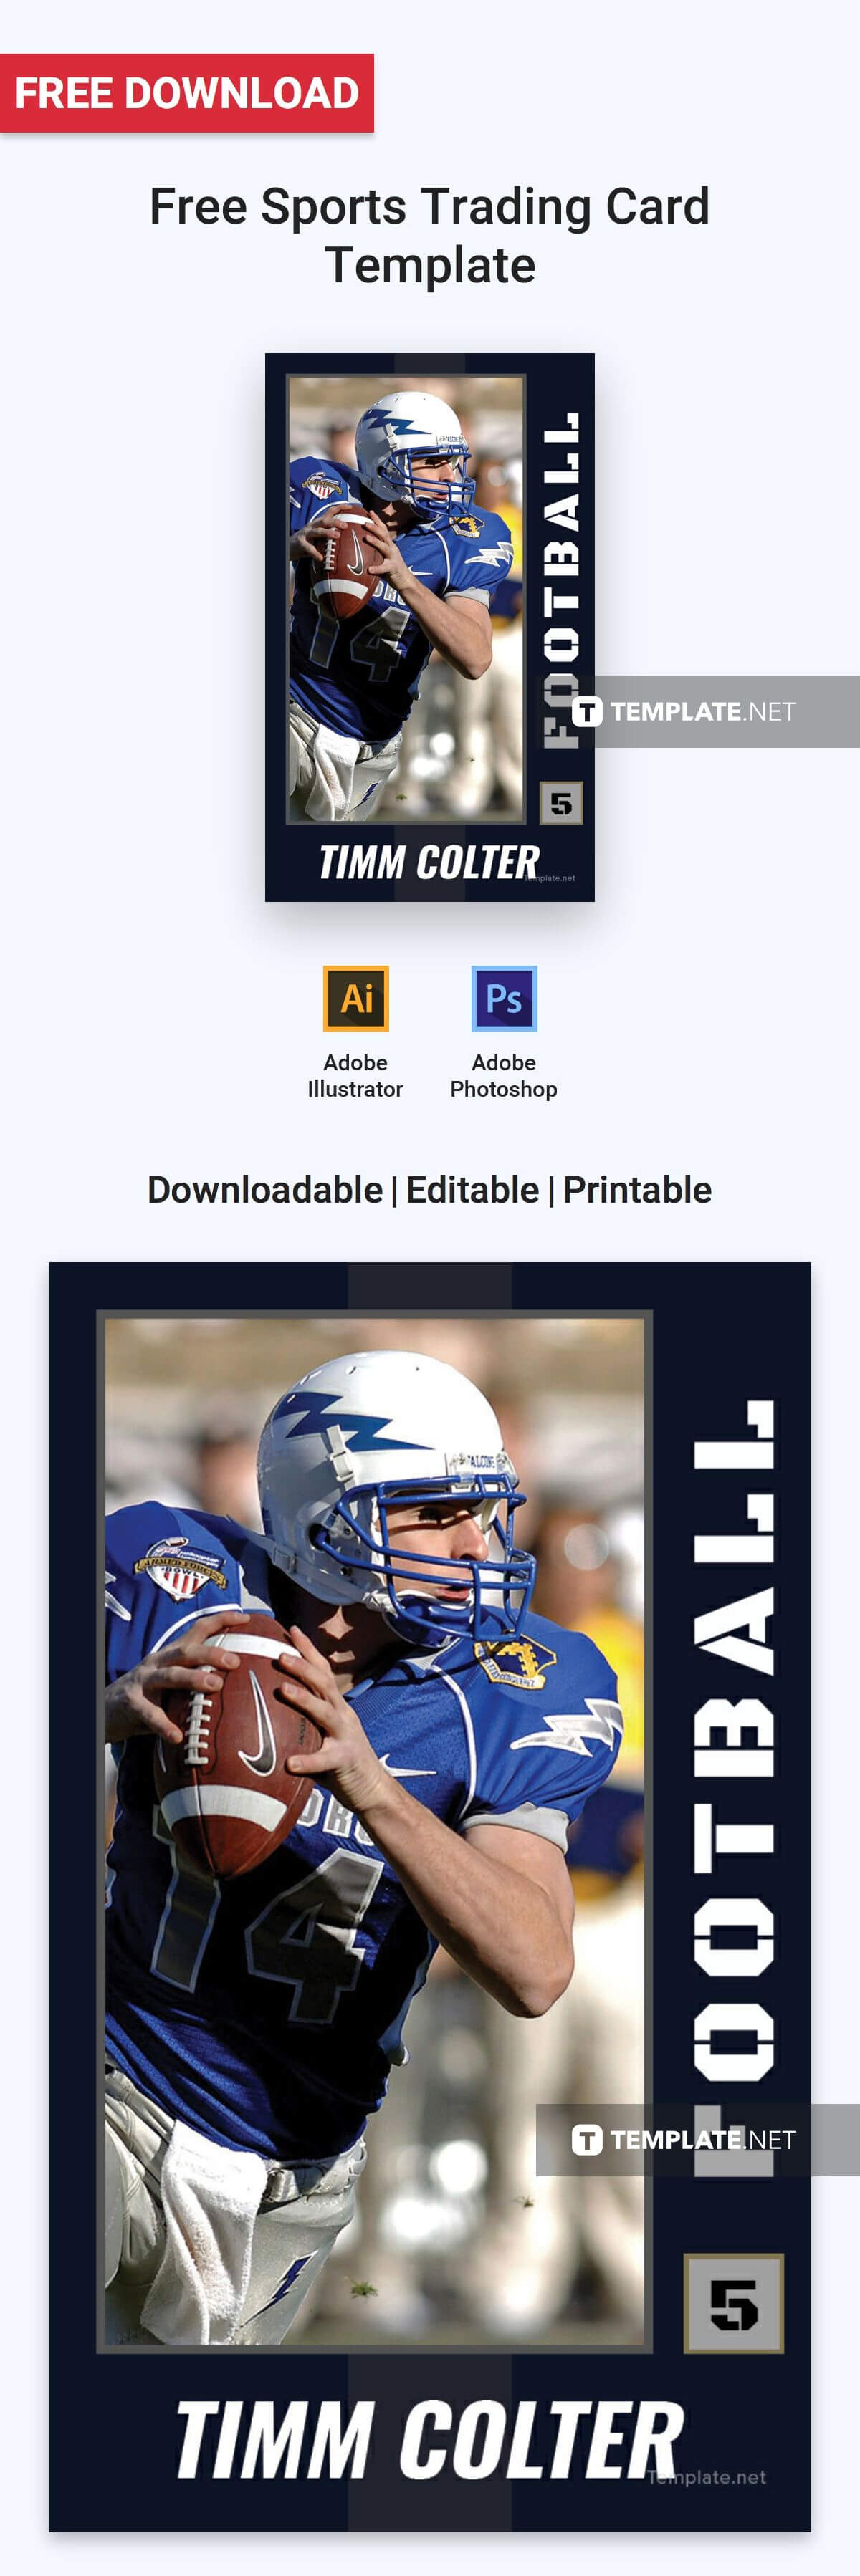 Free Sports Trading Card In 2019 | Card Templates & Designs With Free Sports Card Template